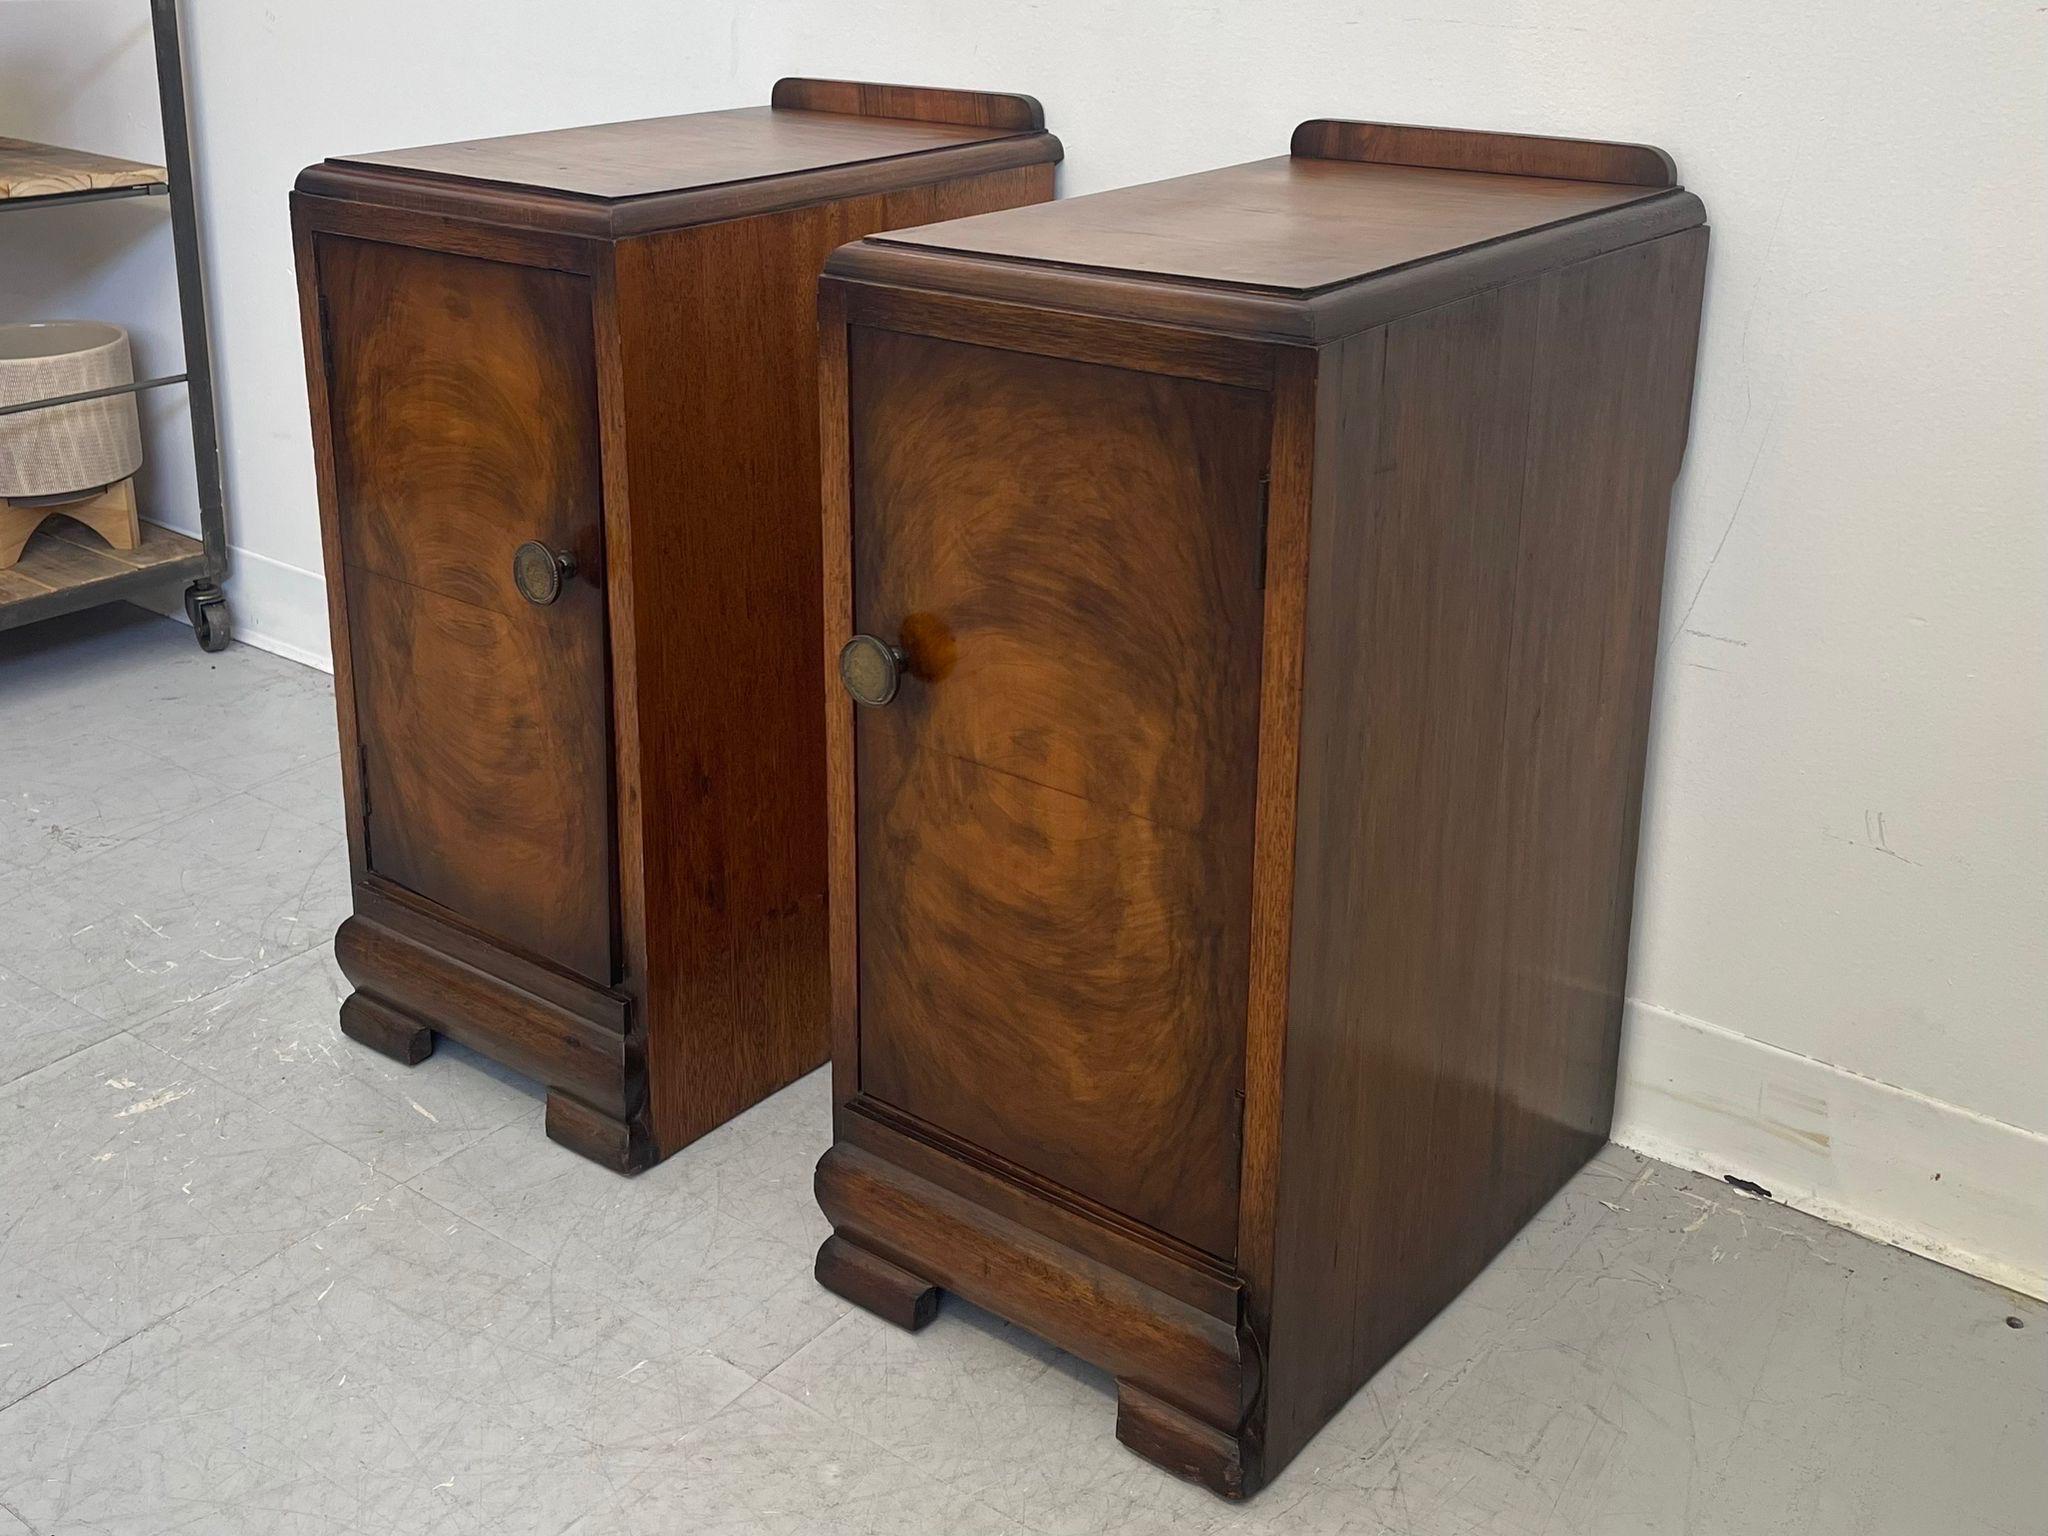 This set of End Tables have beautiful Burl wood on the front door opening to cabinet space with a single shelf. Rounded edges. Vintage condition consistent with age as Pictured.

Dimensions. 12 W ; 18 D ; 26 H